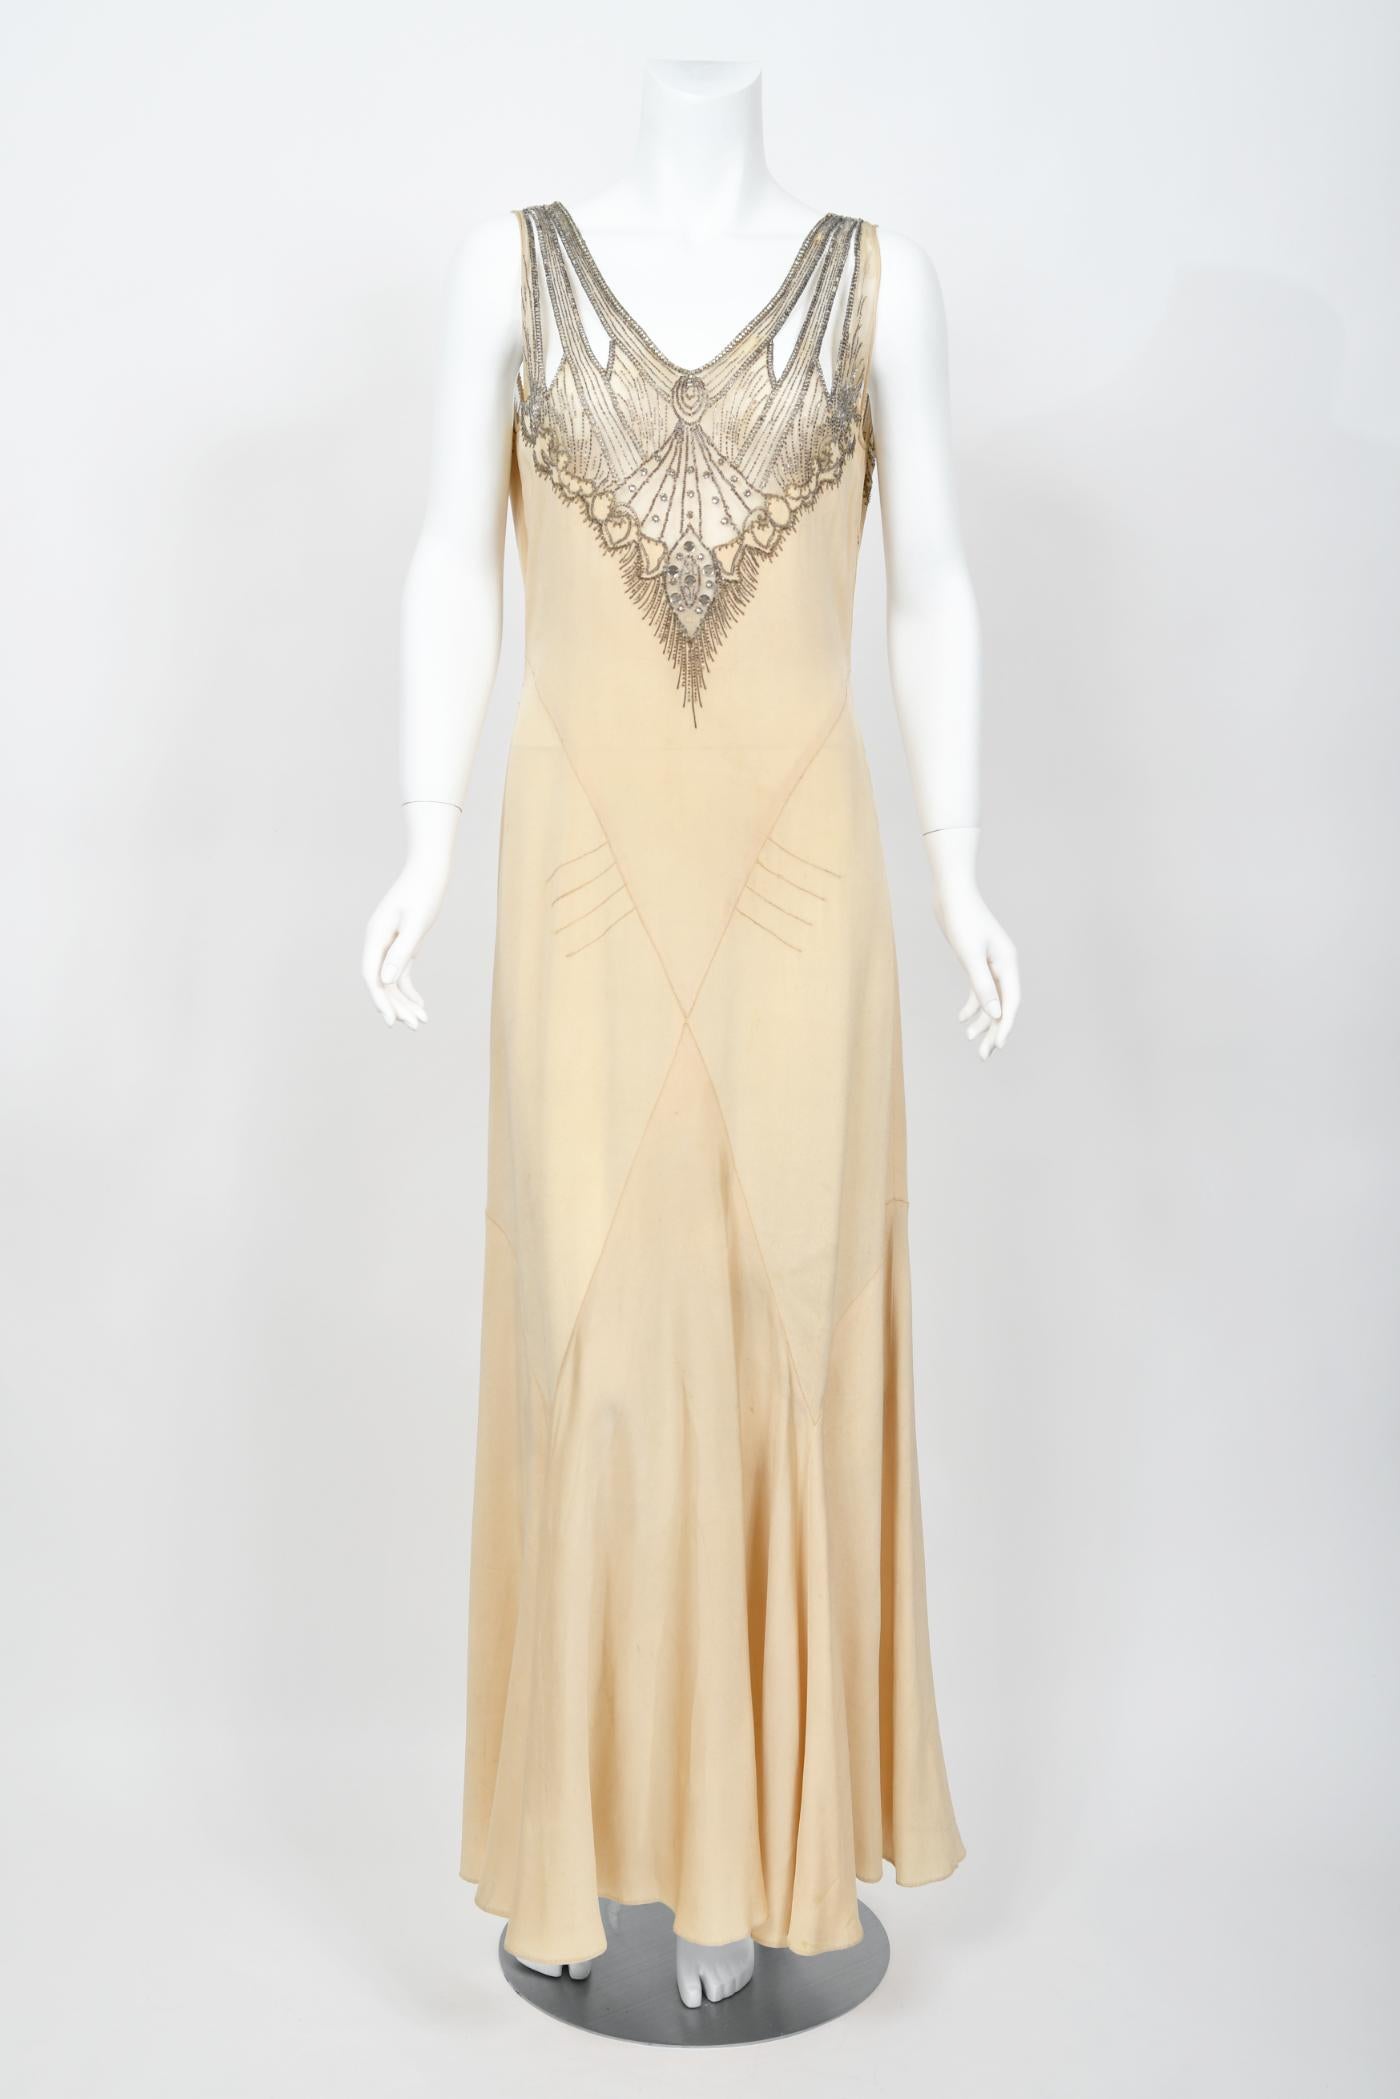 1930's French Ivory Creme Silk Beaded Sheer Illusion Deco Bias-Cut Bridal Gown   For Sale 1